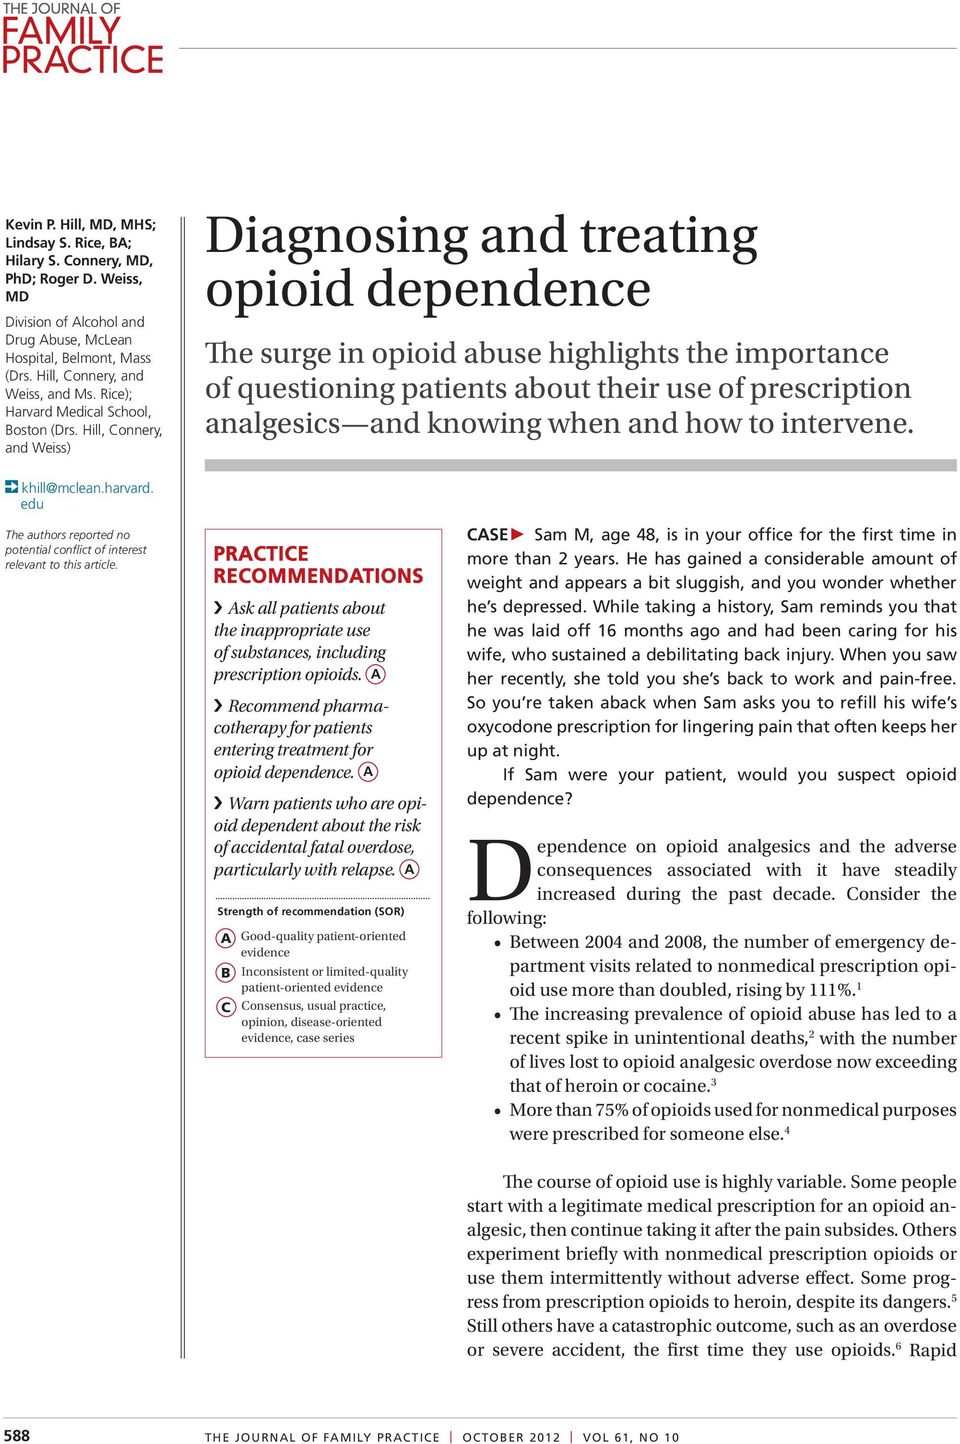 Hill, Connery, and Weiss) Diagnosing and treating opioid dependence The surge in opioid abuse highlights the importance of questioning patients about their use of prescription analgesics and knowing